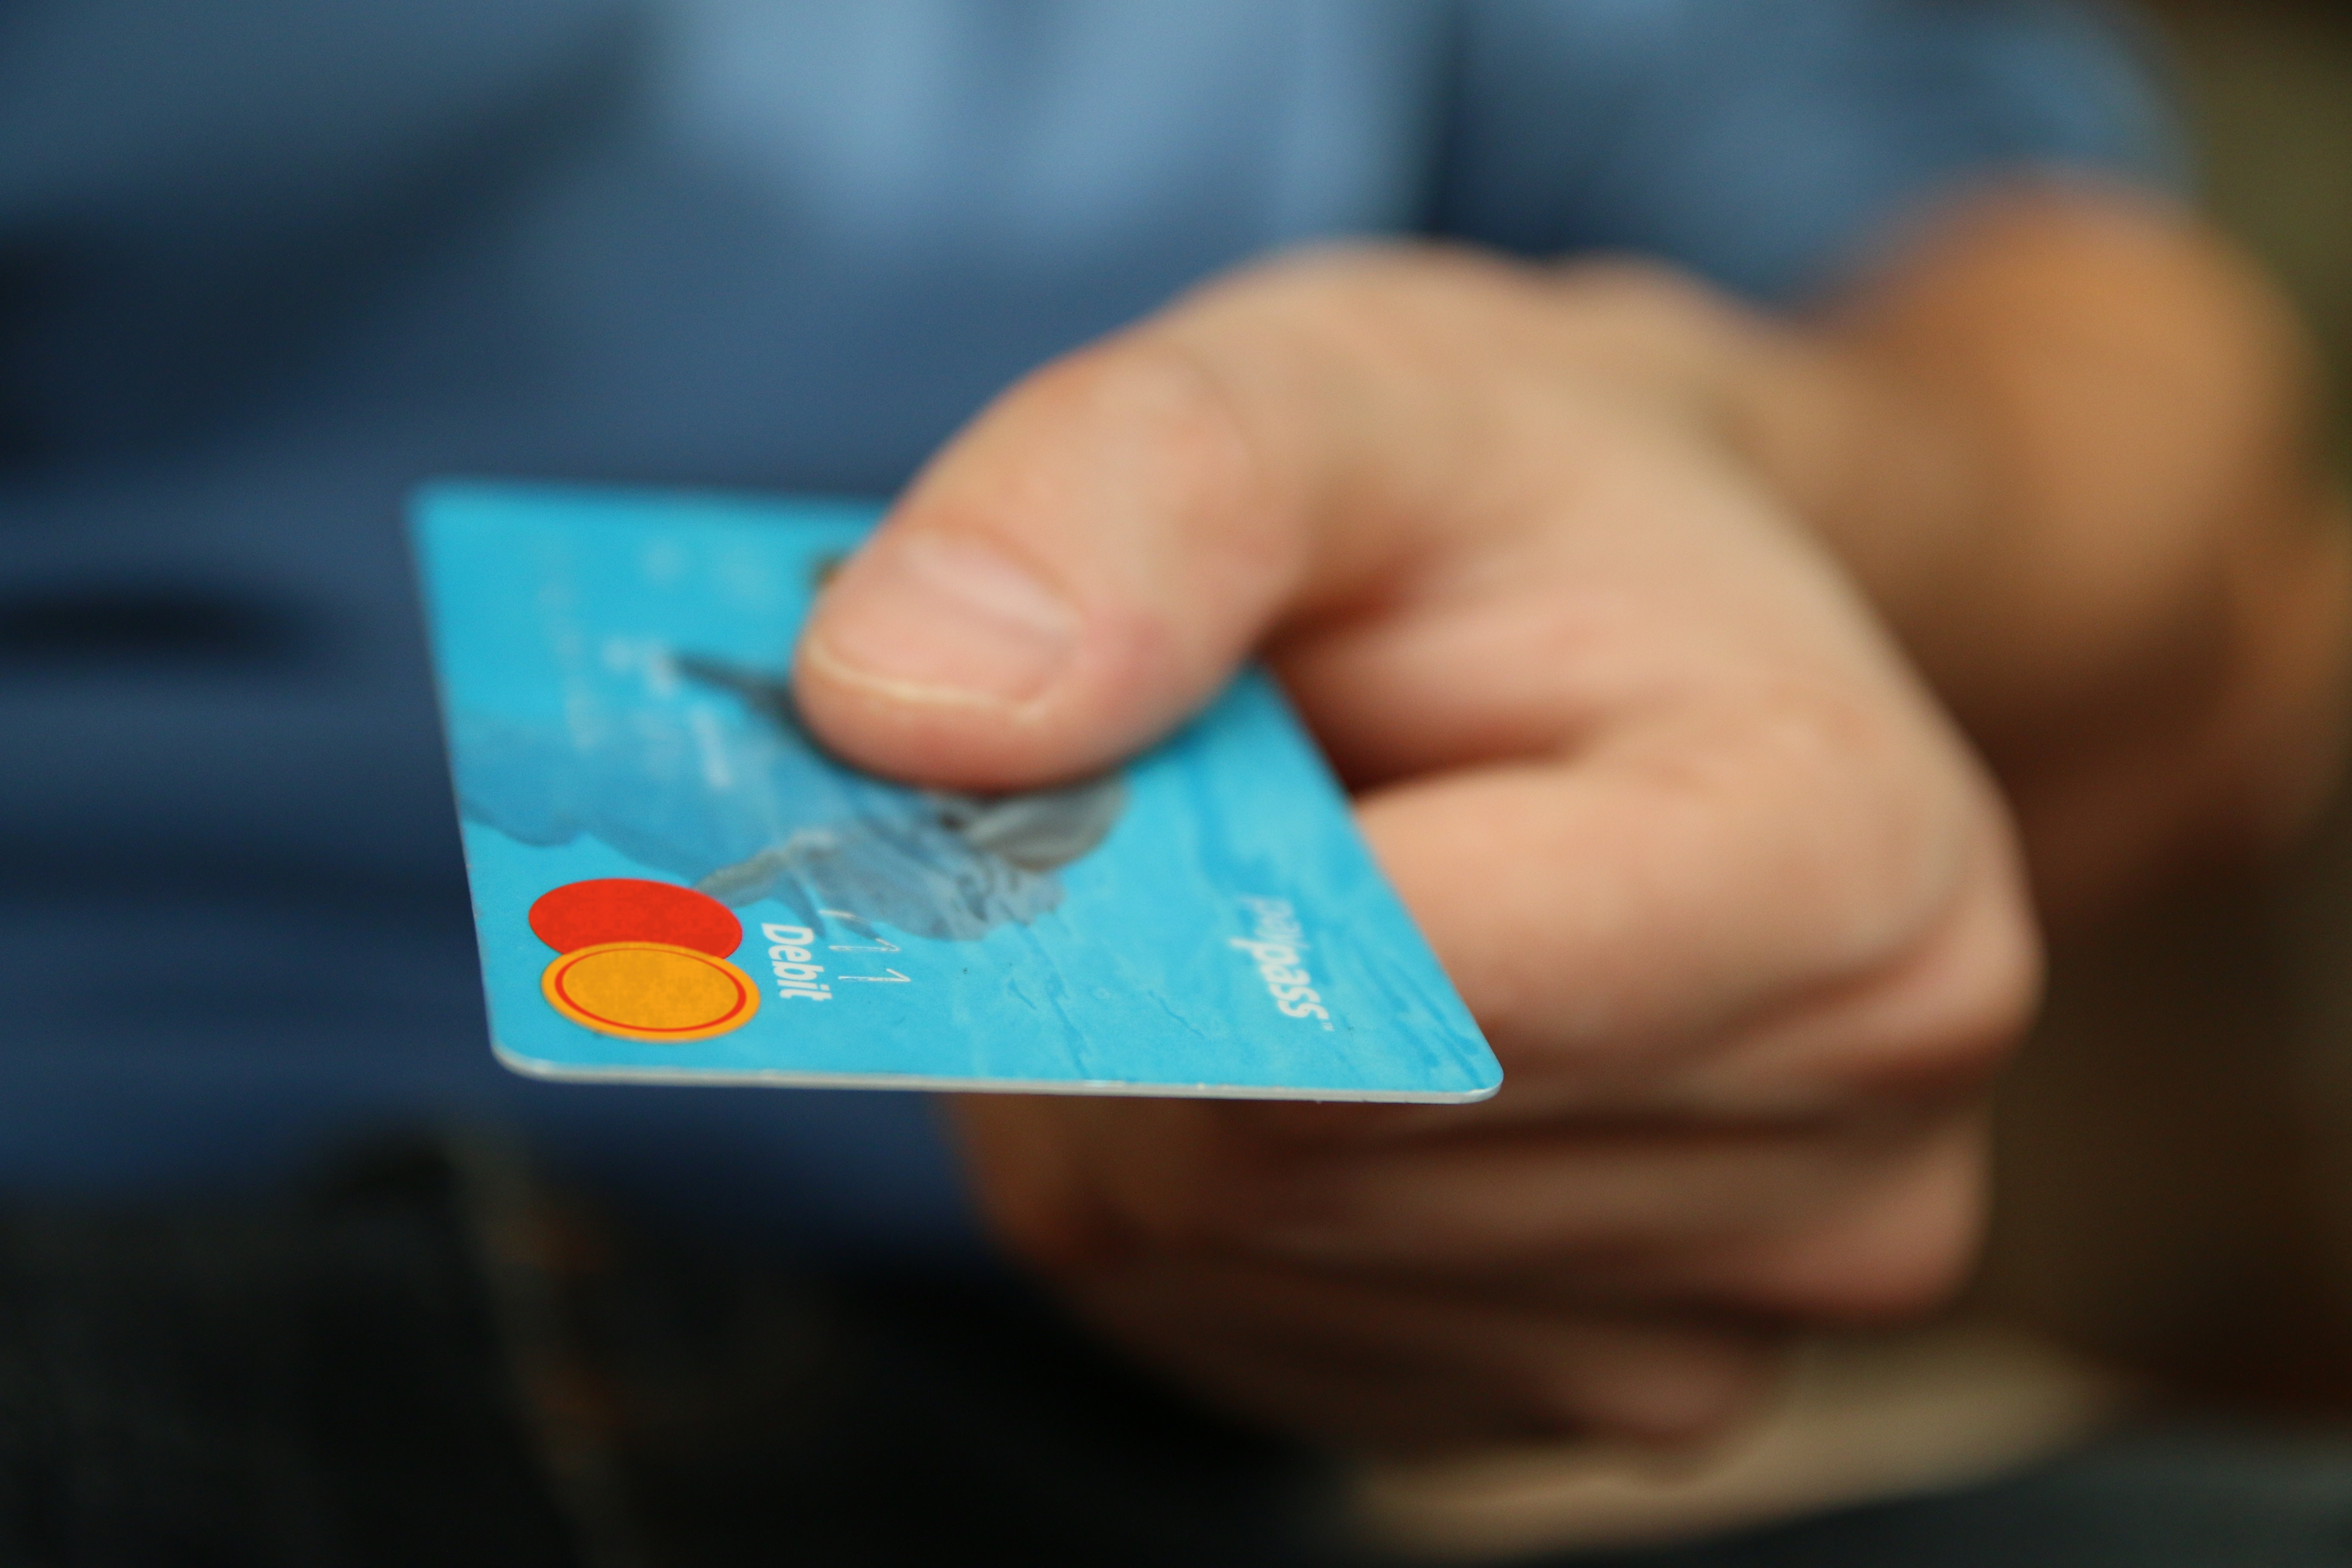 Close up of a hand proffering a debit card towards the viewer